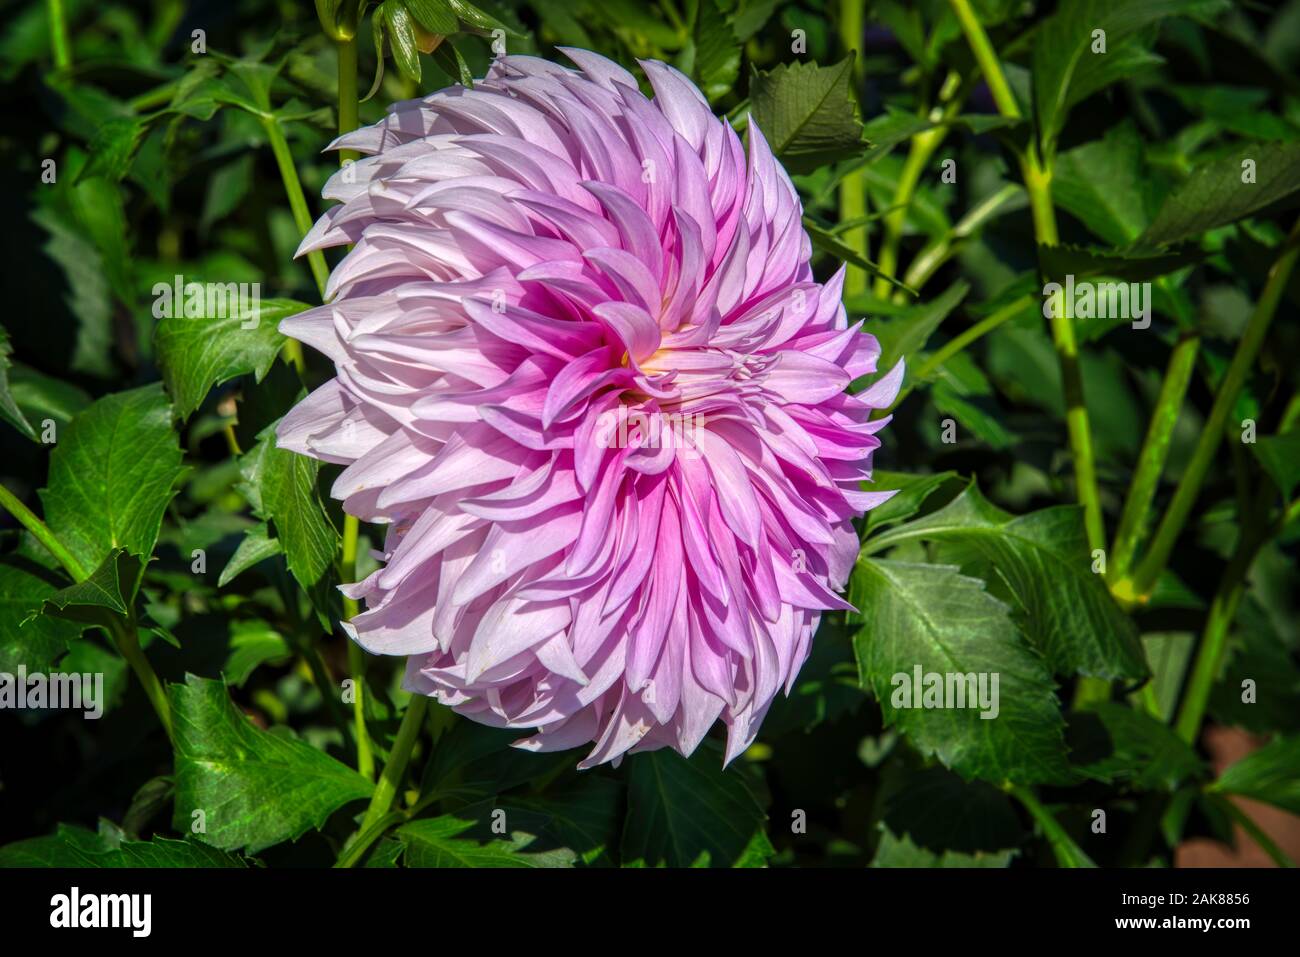 Dahlia from Swan Island Dahlias Farm during Dahlia Festival. Located in Woodburn, Oregon, is the largest dahlia grower in the United States. Stock Photo